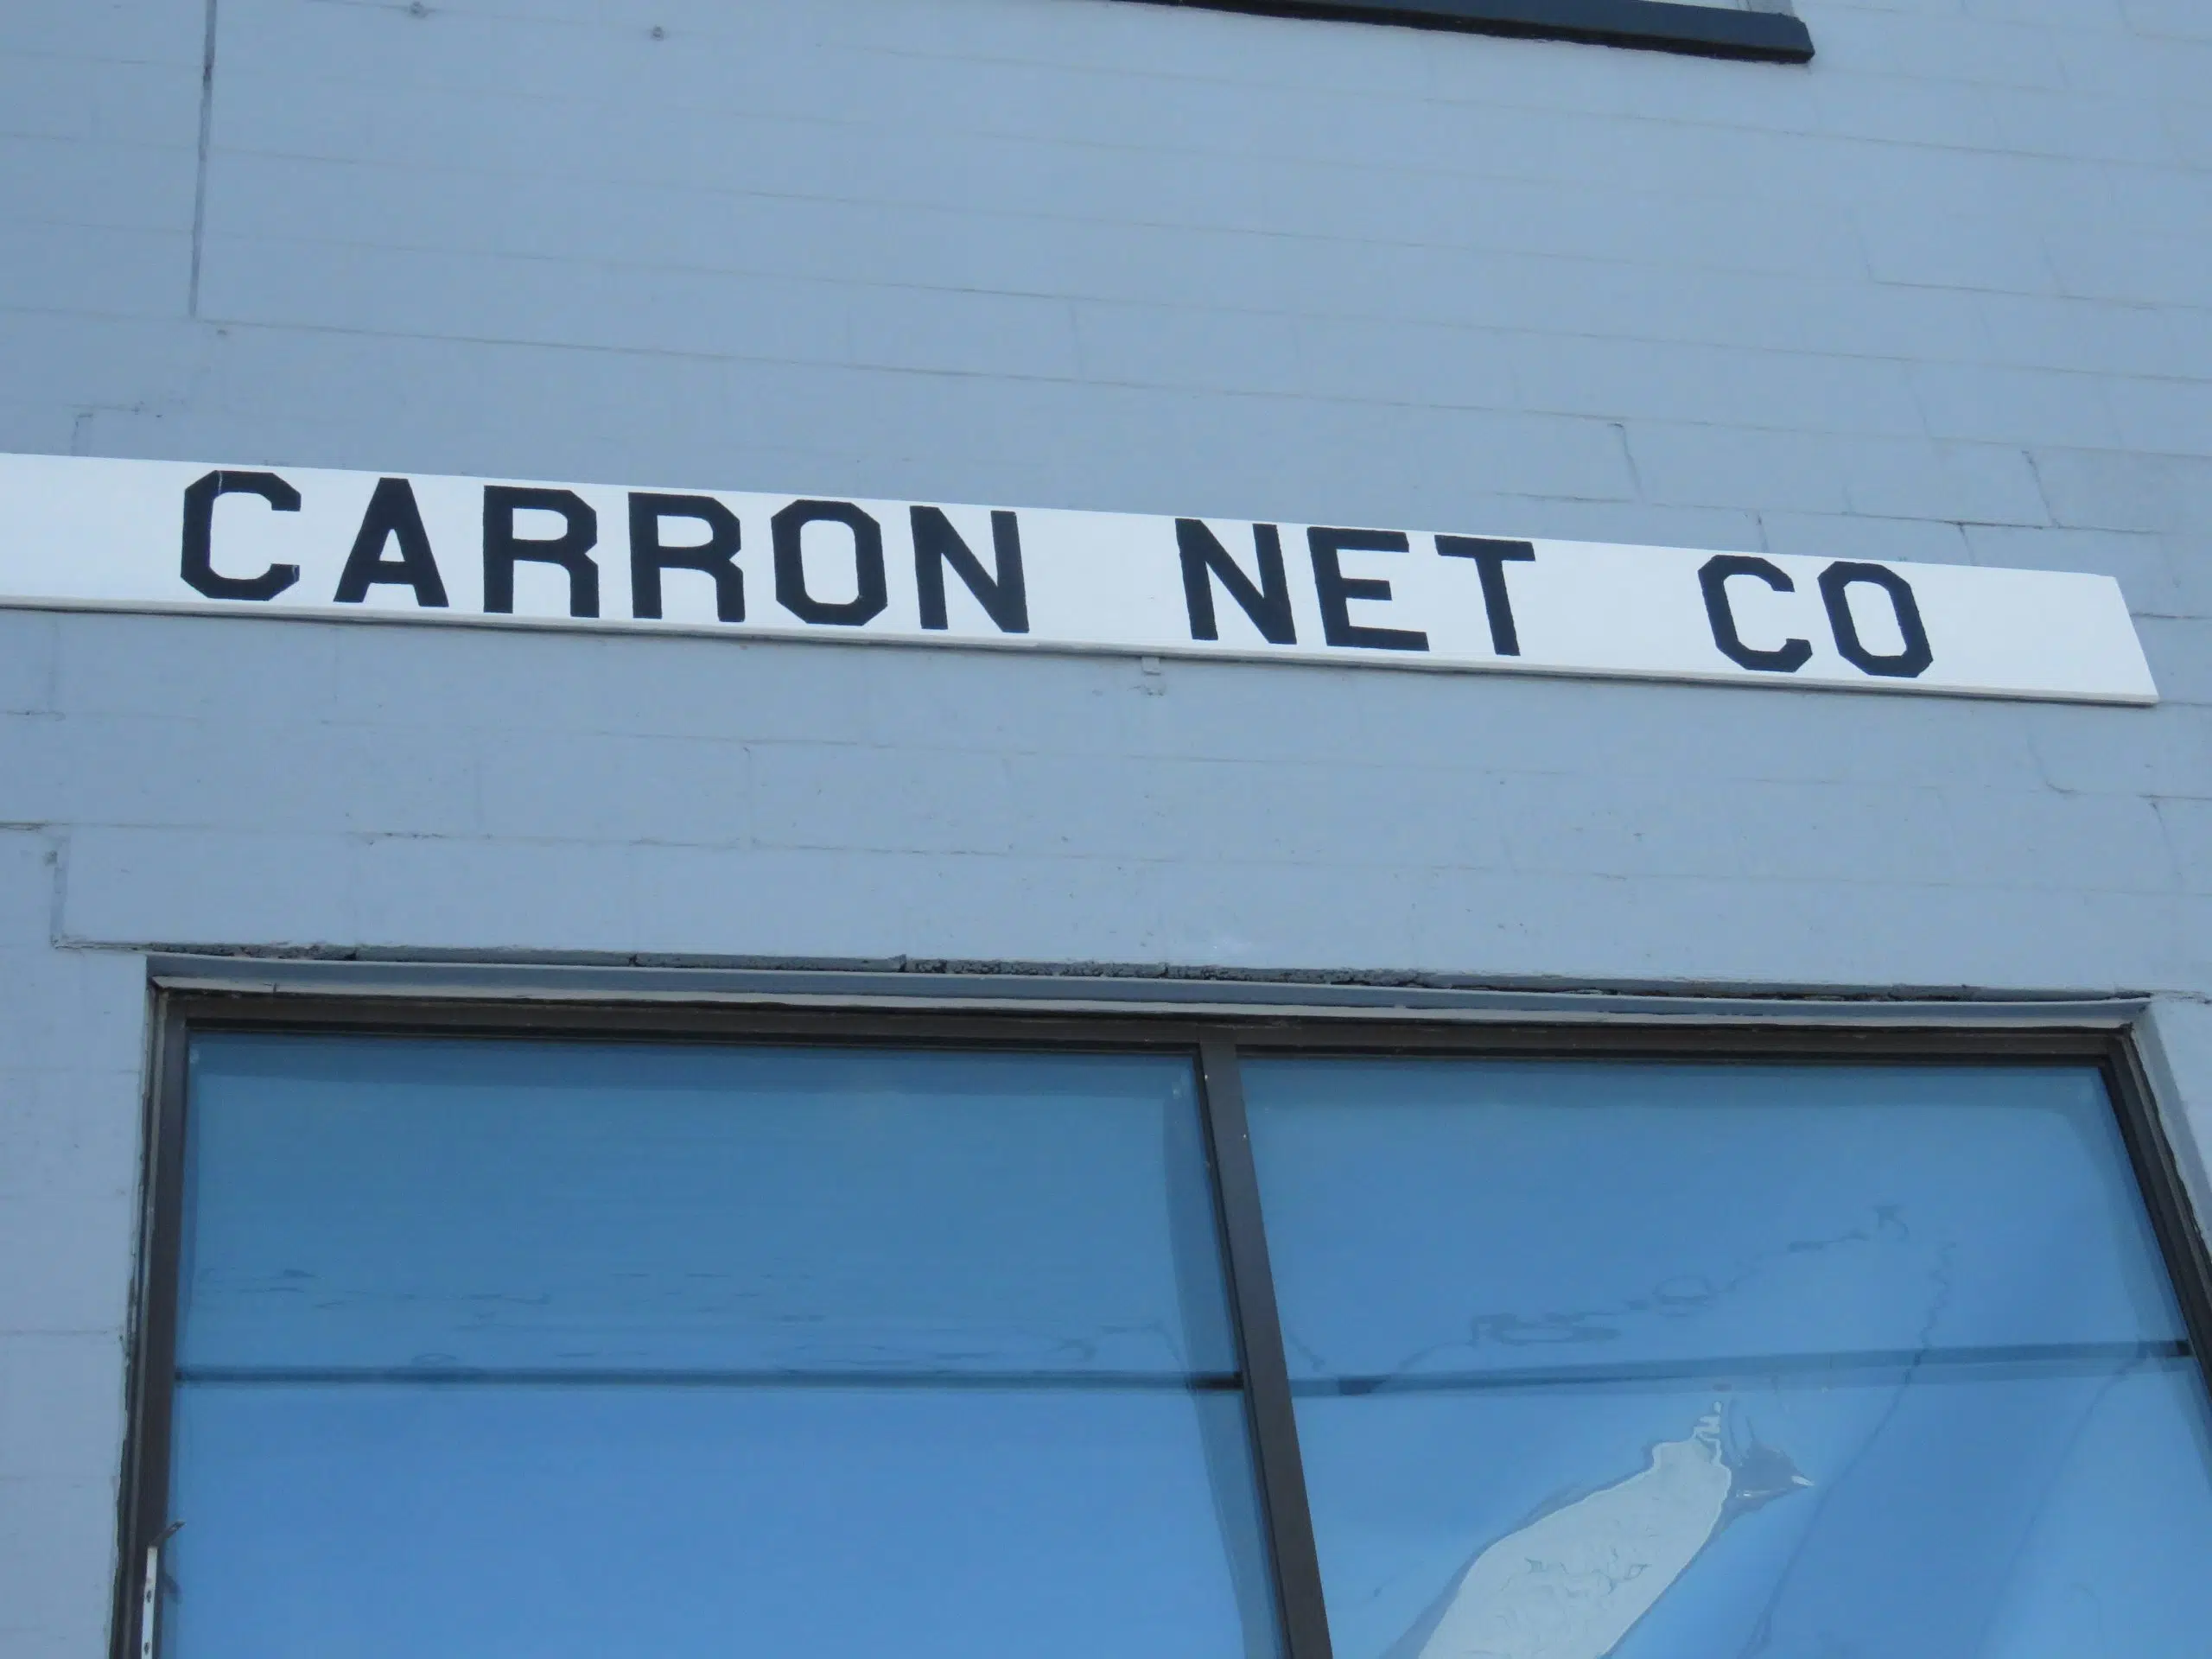 Carron Net Nominated for Coolest Thing Made in Wisconsin Competition